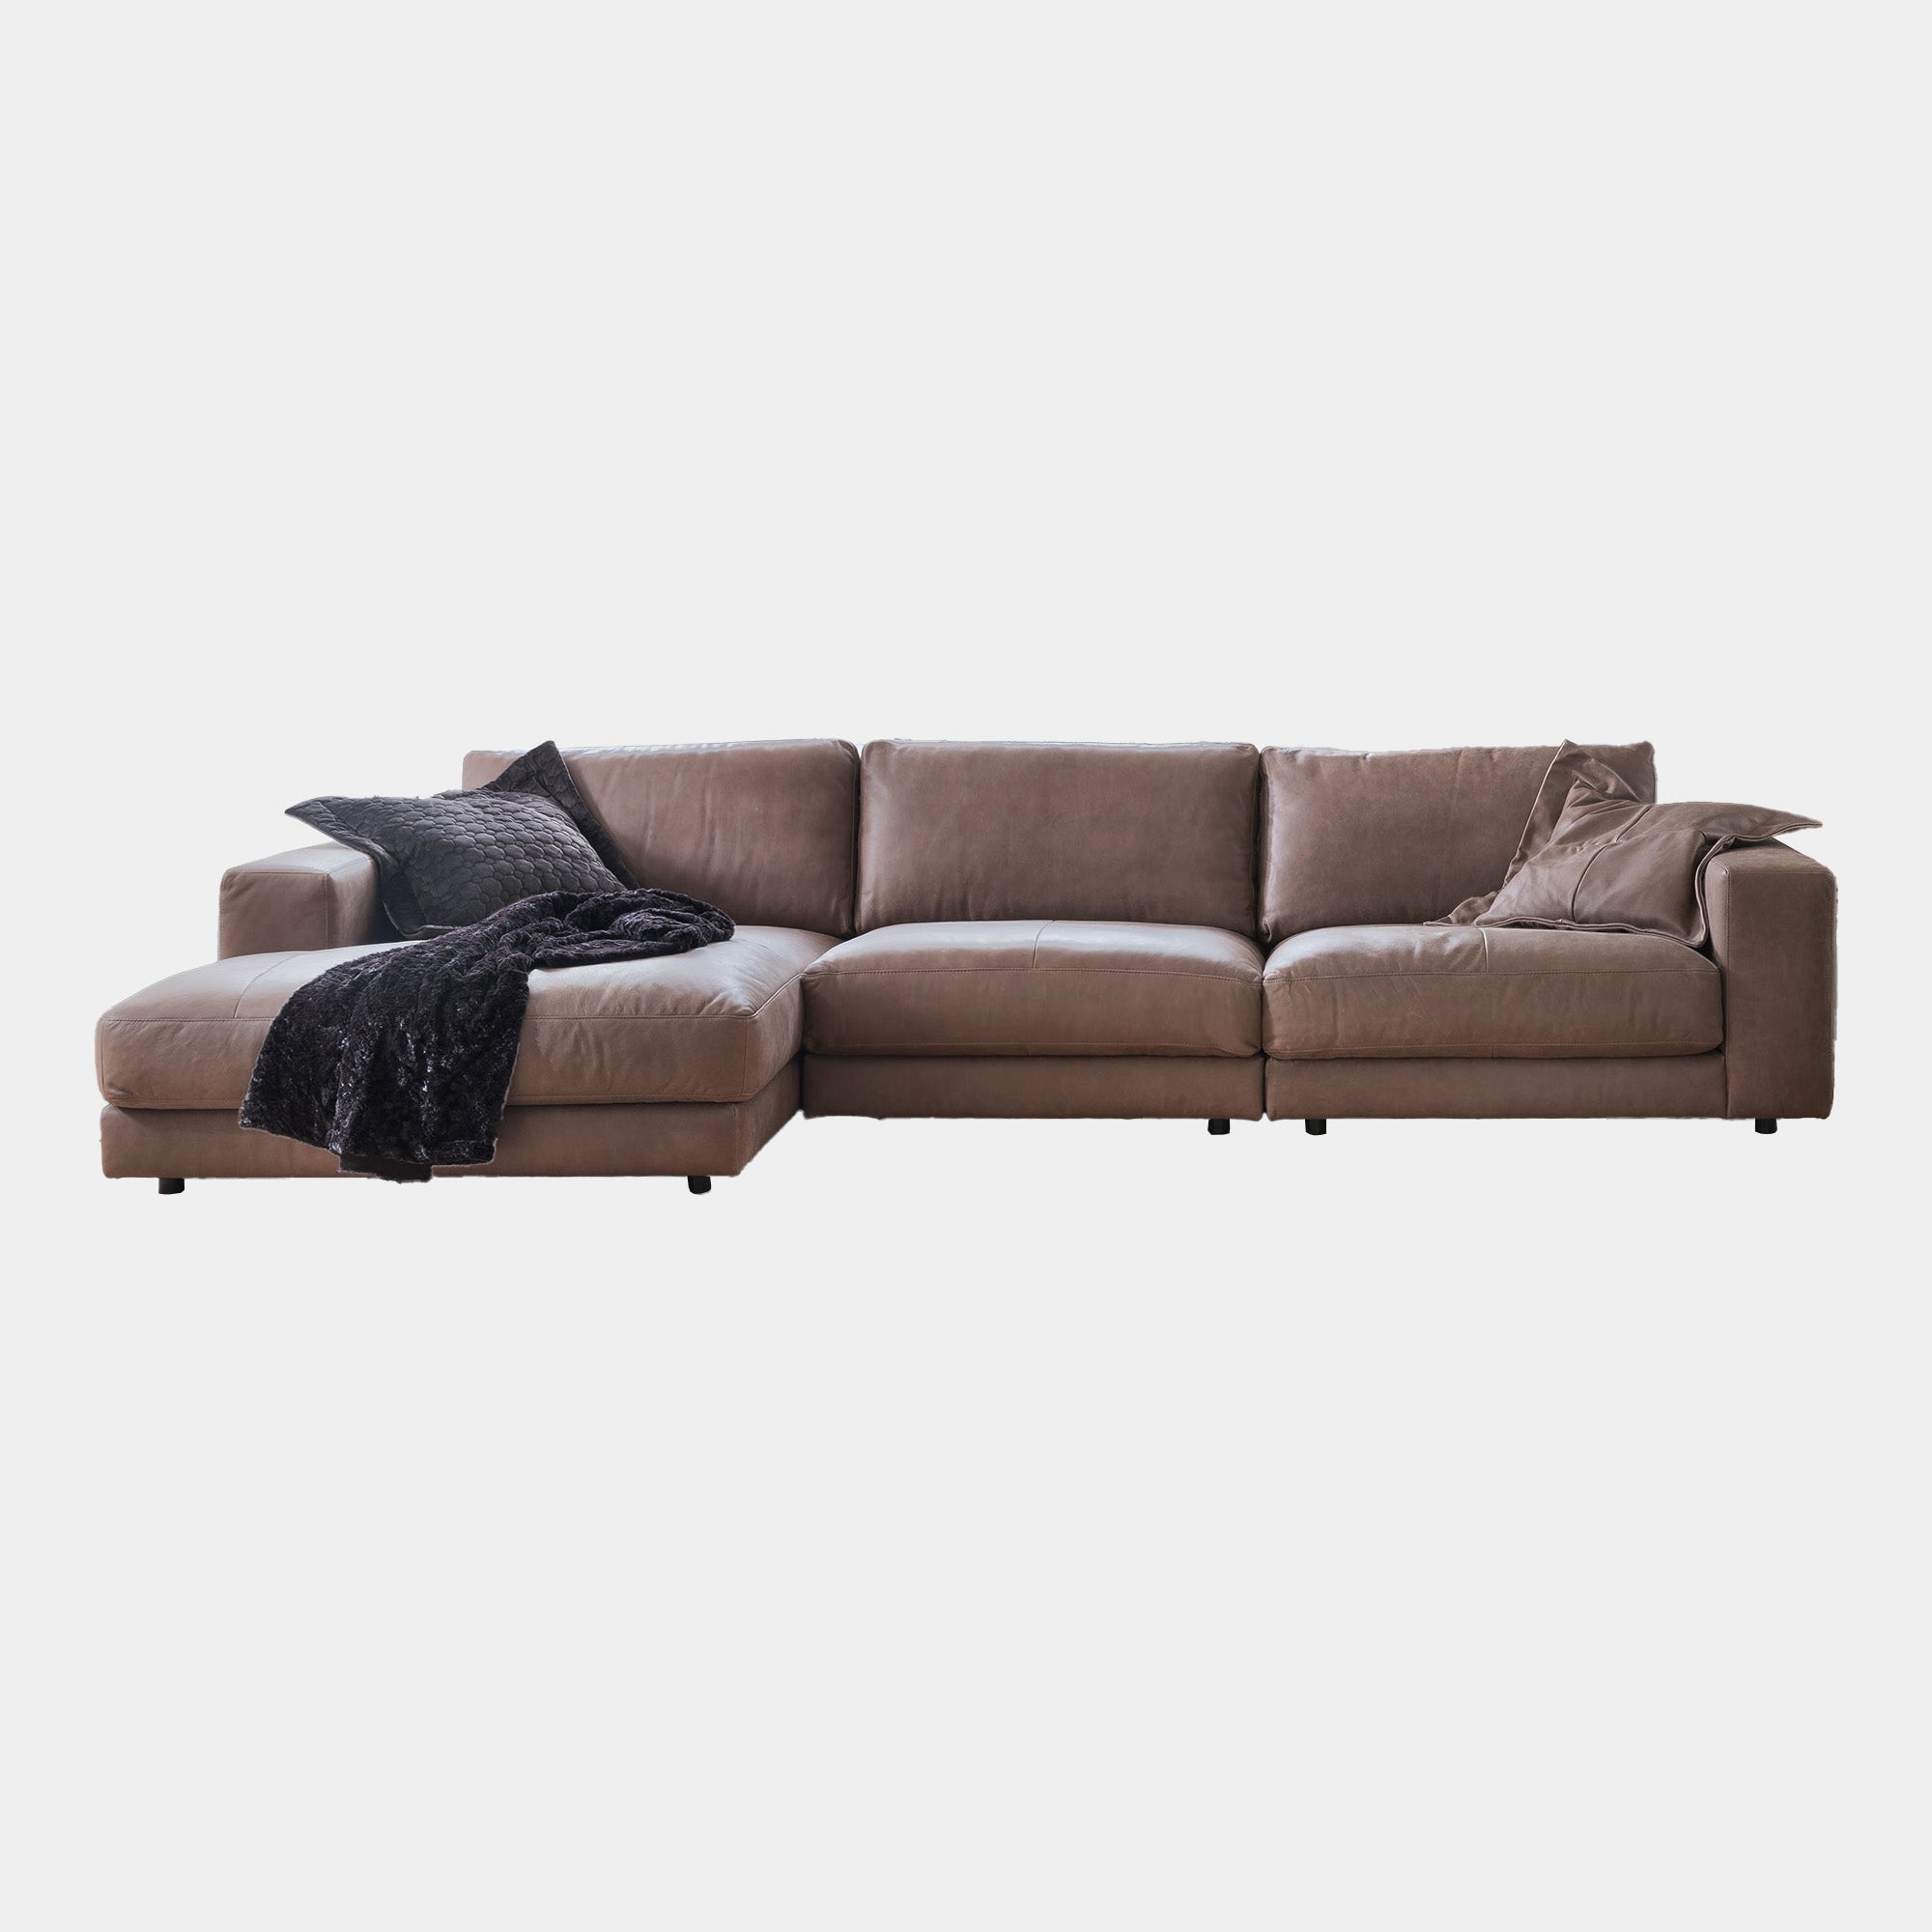 Domino - Large Sofa With LHF Chaise In Leather